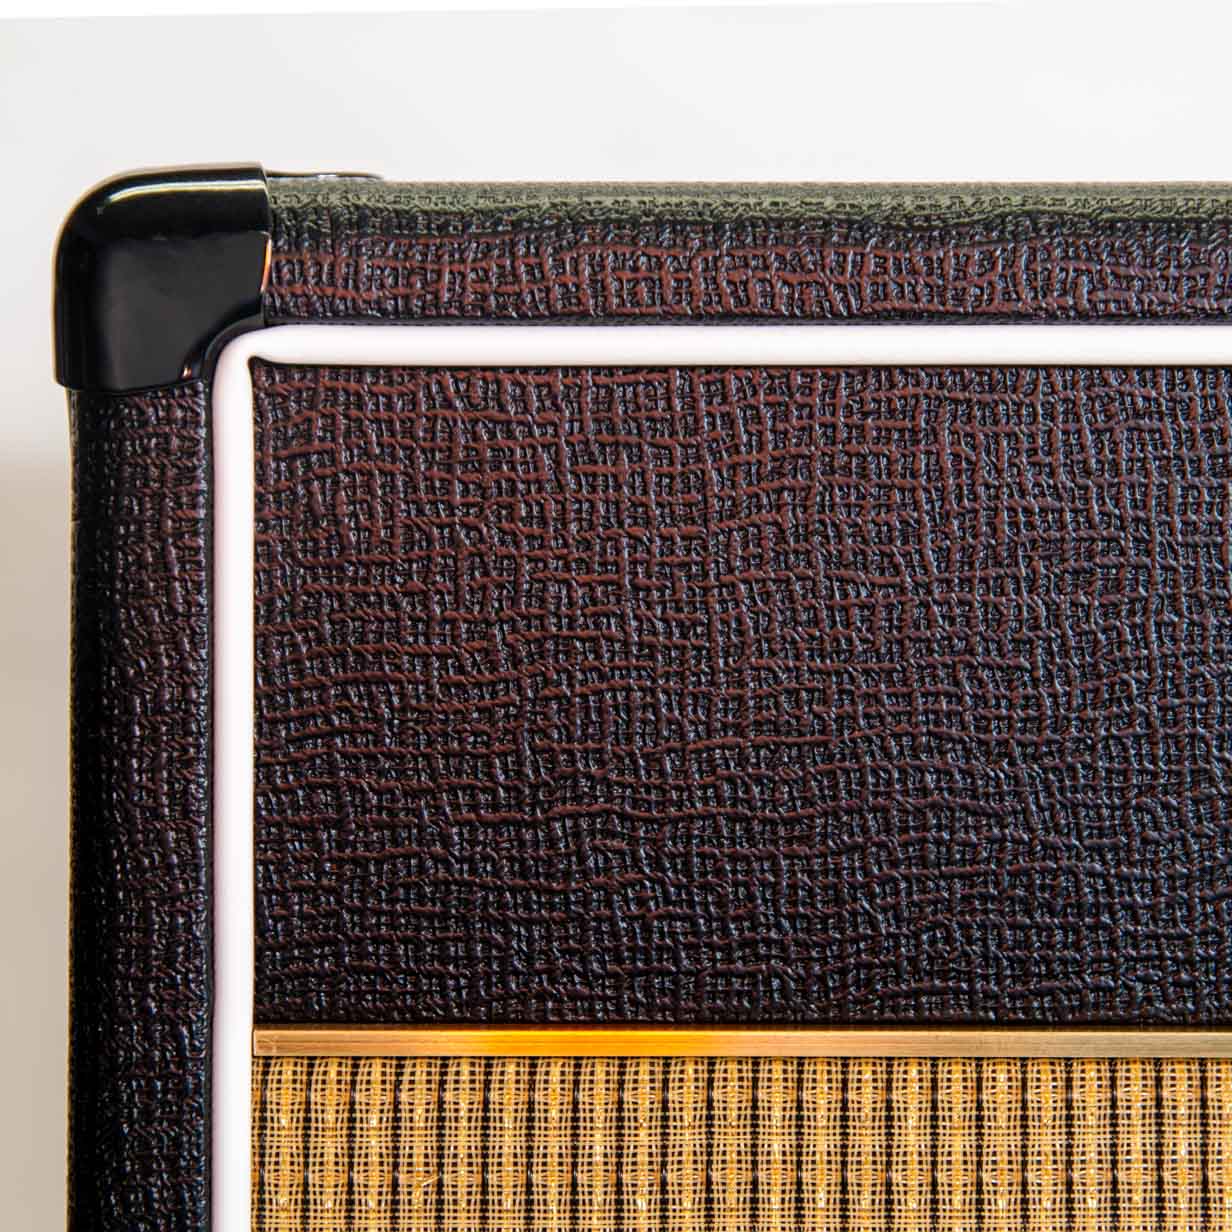 Cropped detail view of front top corner of amp showing textured vinyll, brass accent, and gold grill cloth